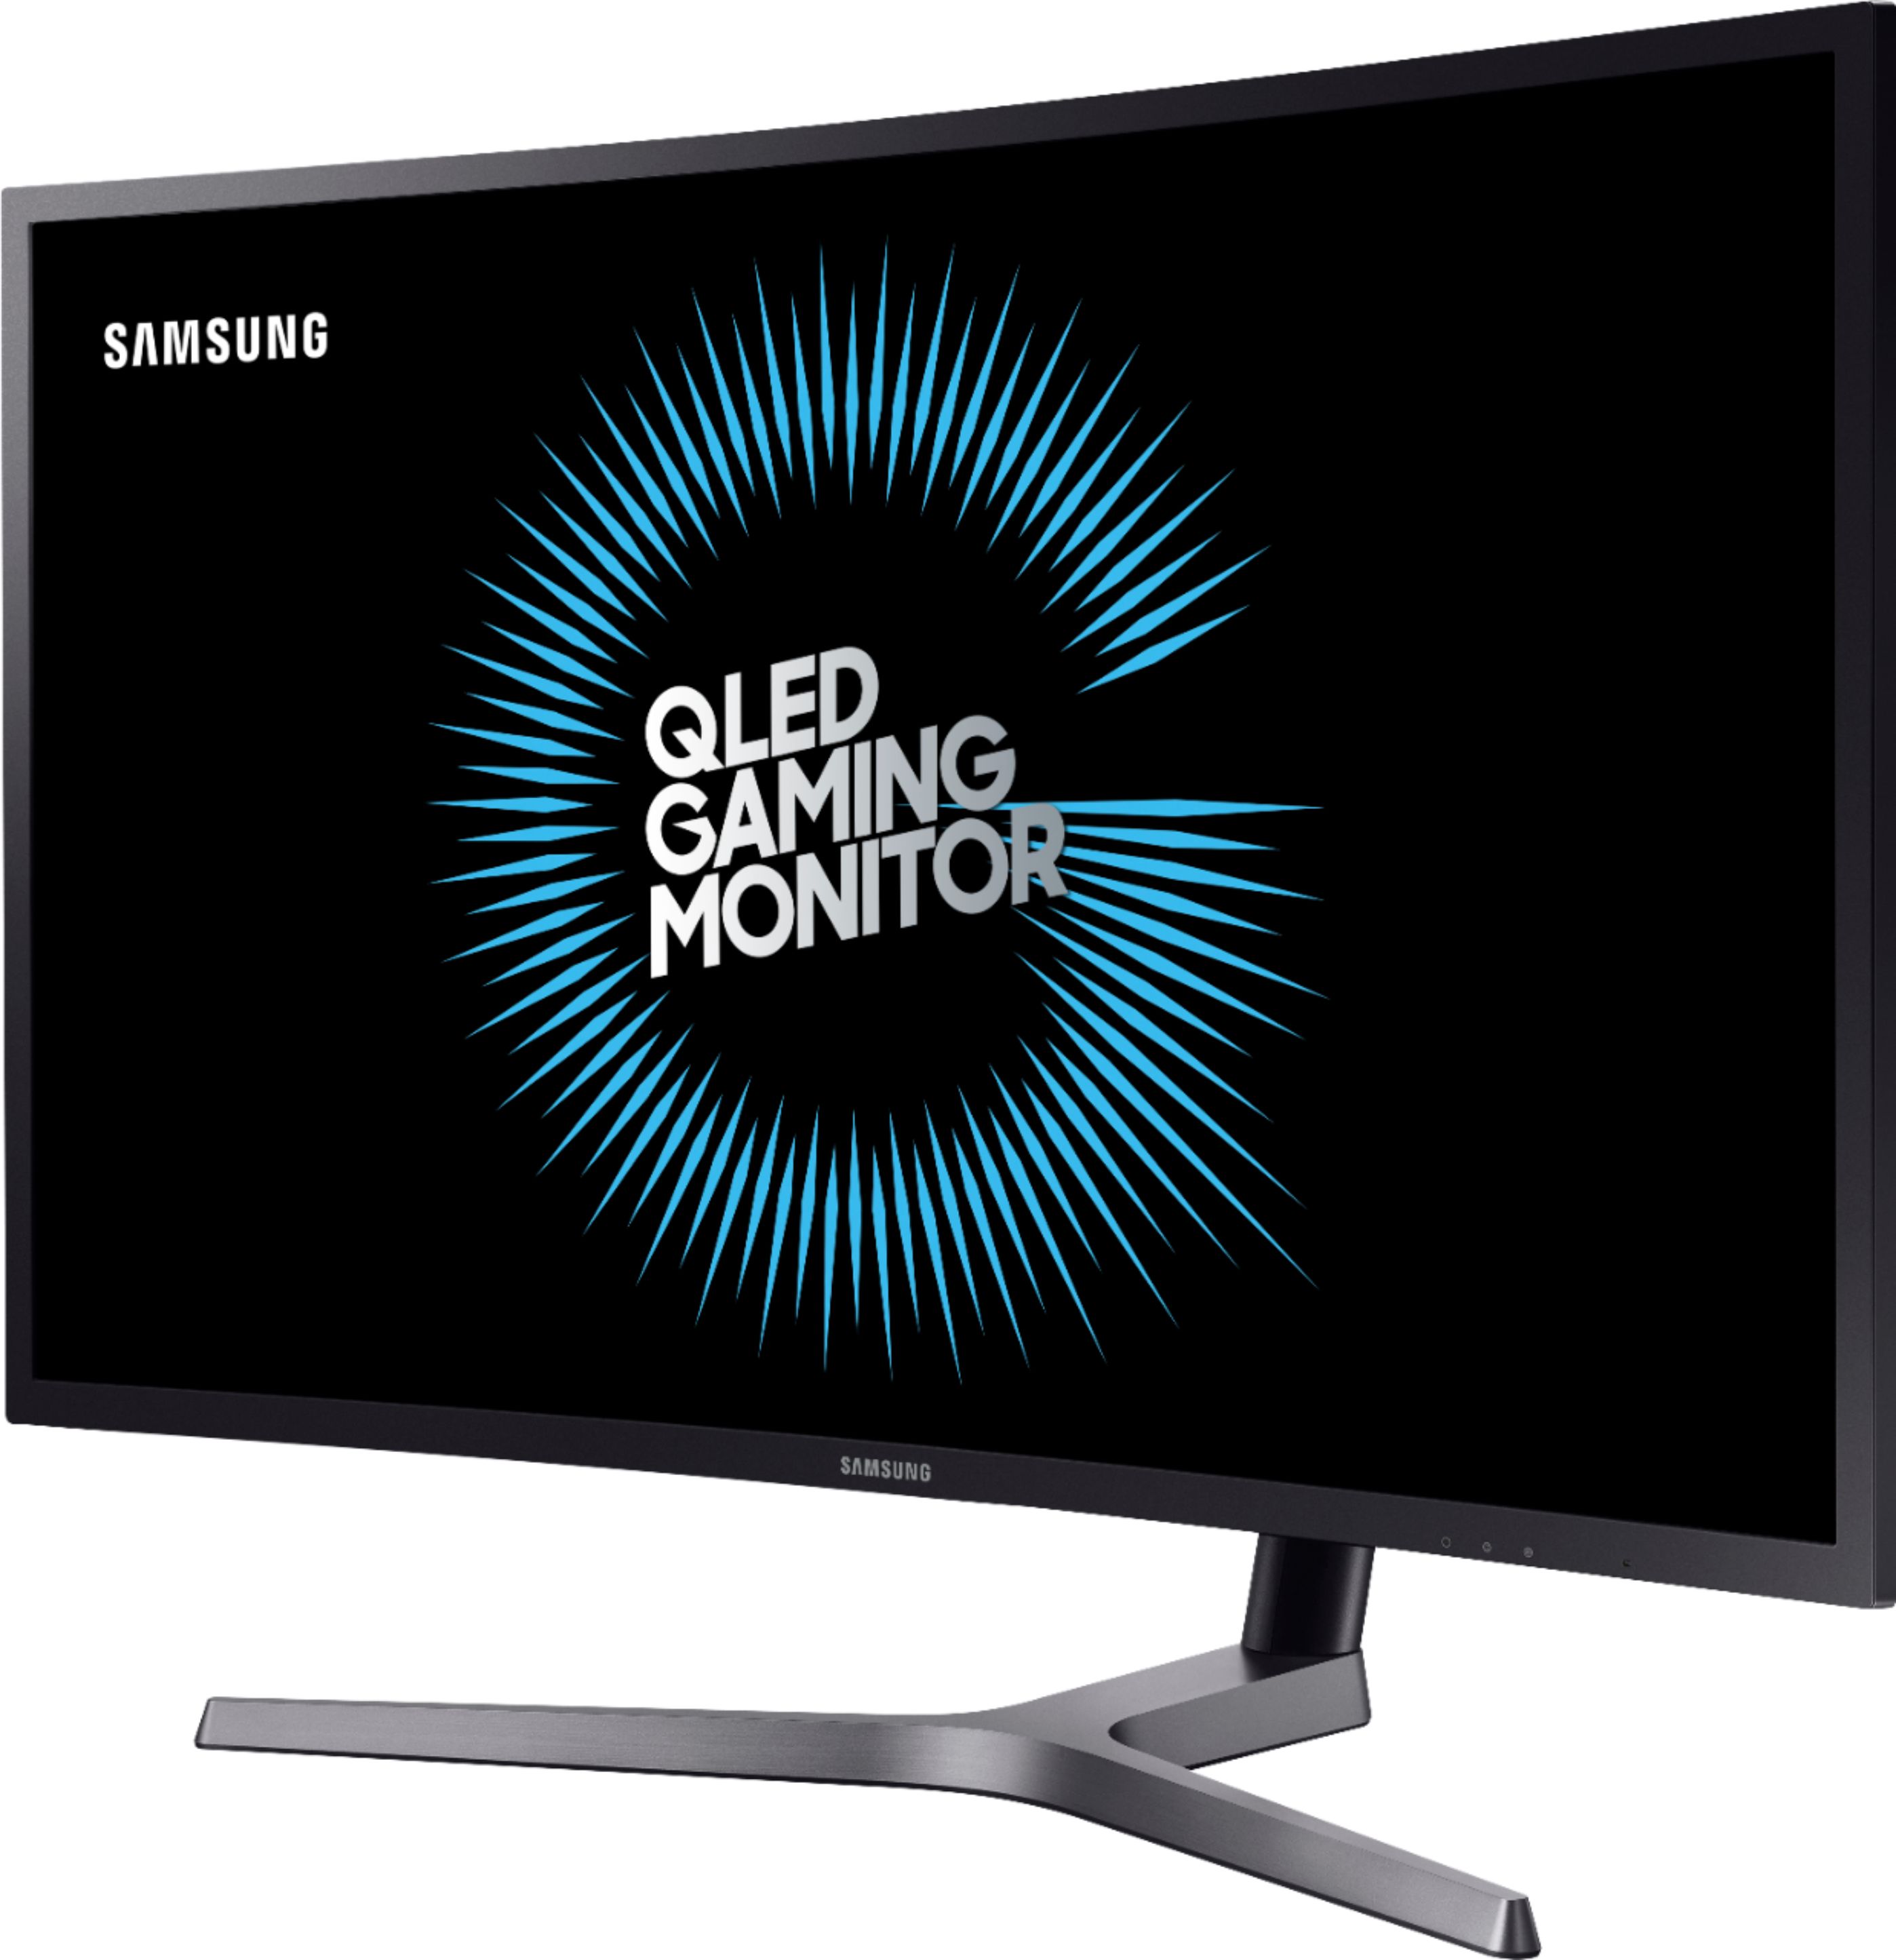 Left View: Samsung - Geek Squad Certified Refurbished 27" LED Curved QHD FreeSync Monitor with HDR - Matte Dark Blue/Black